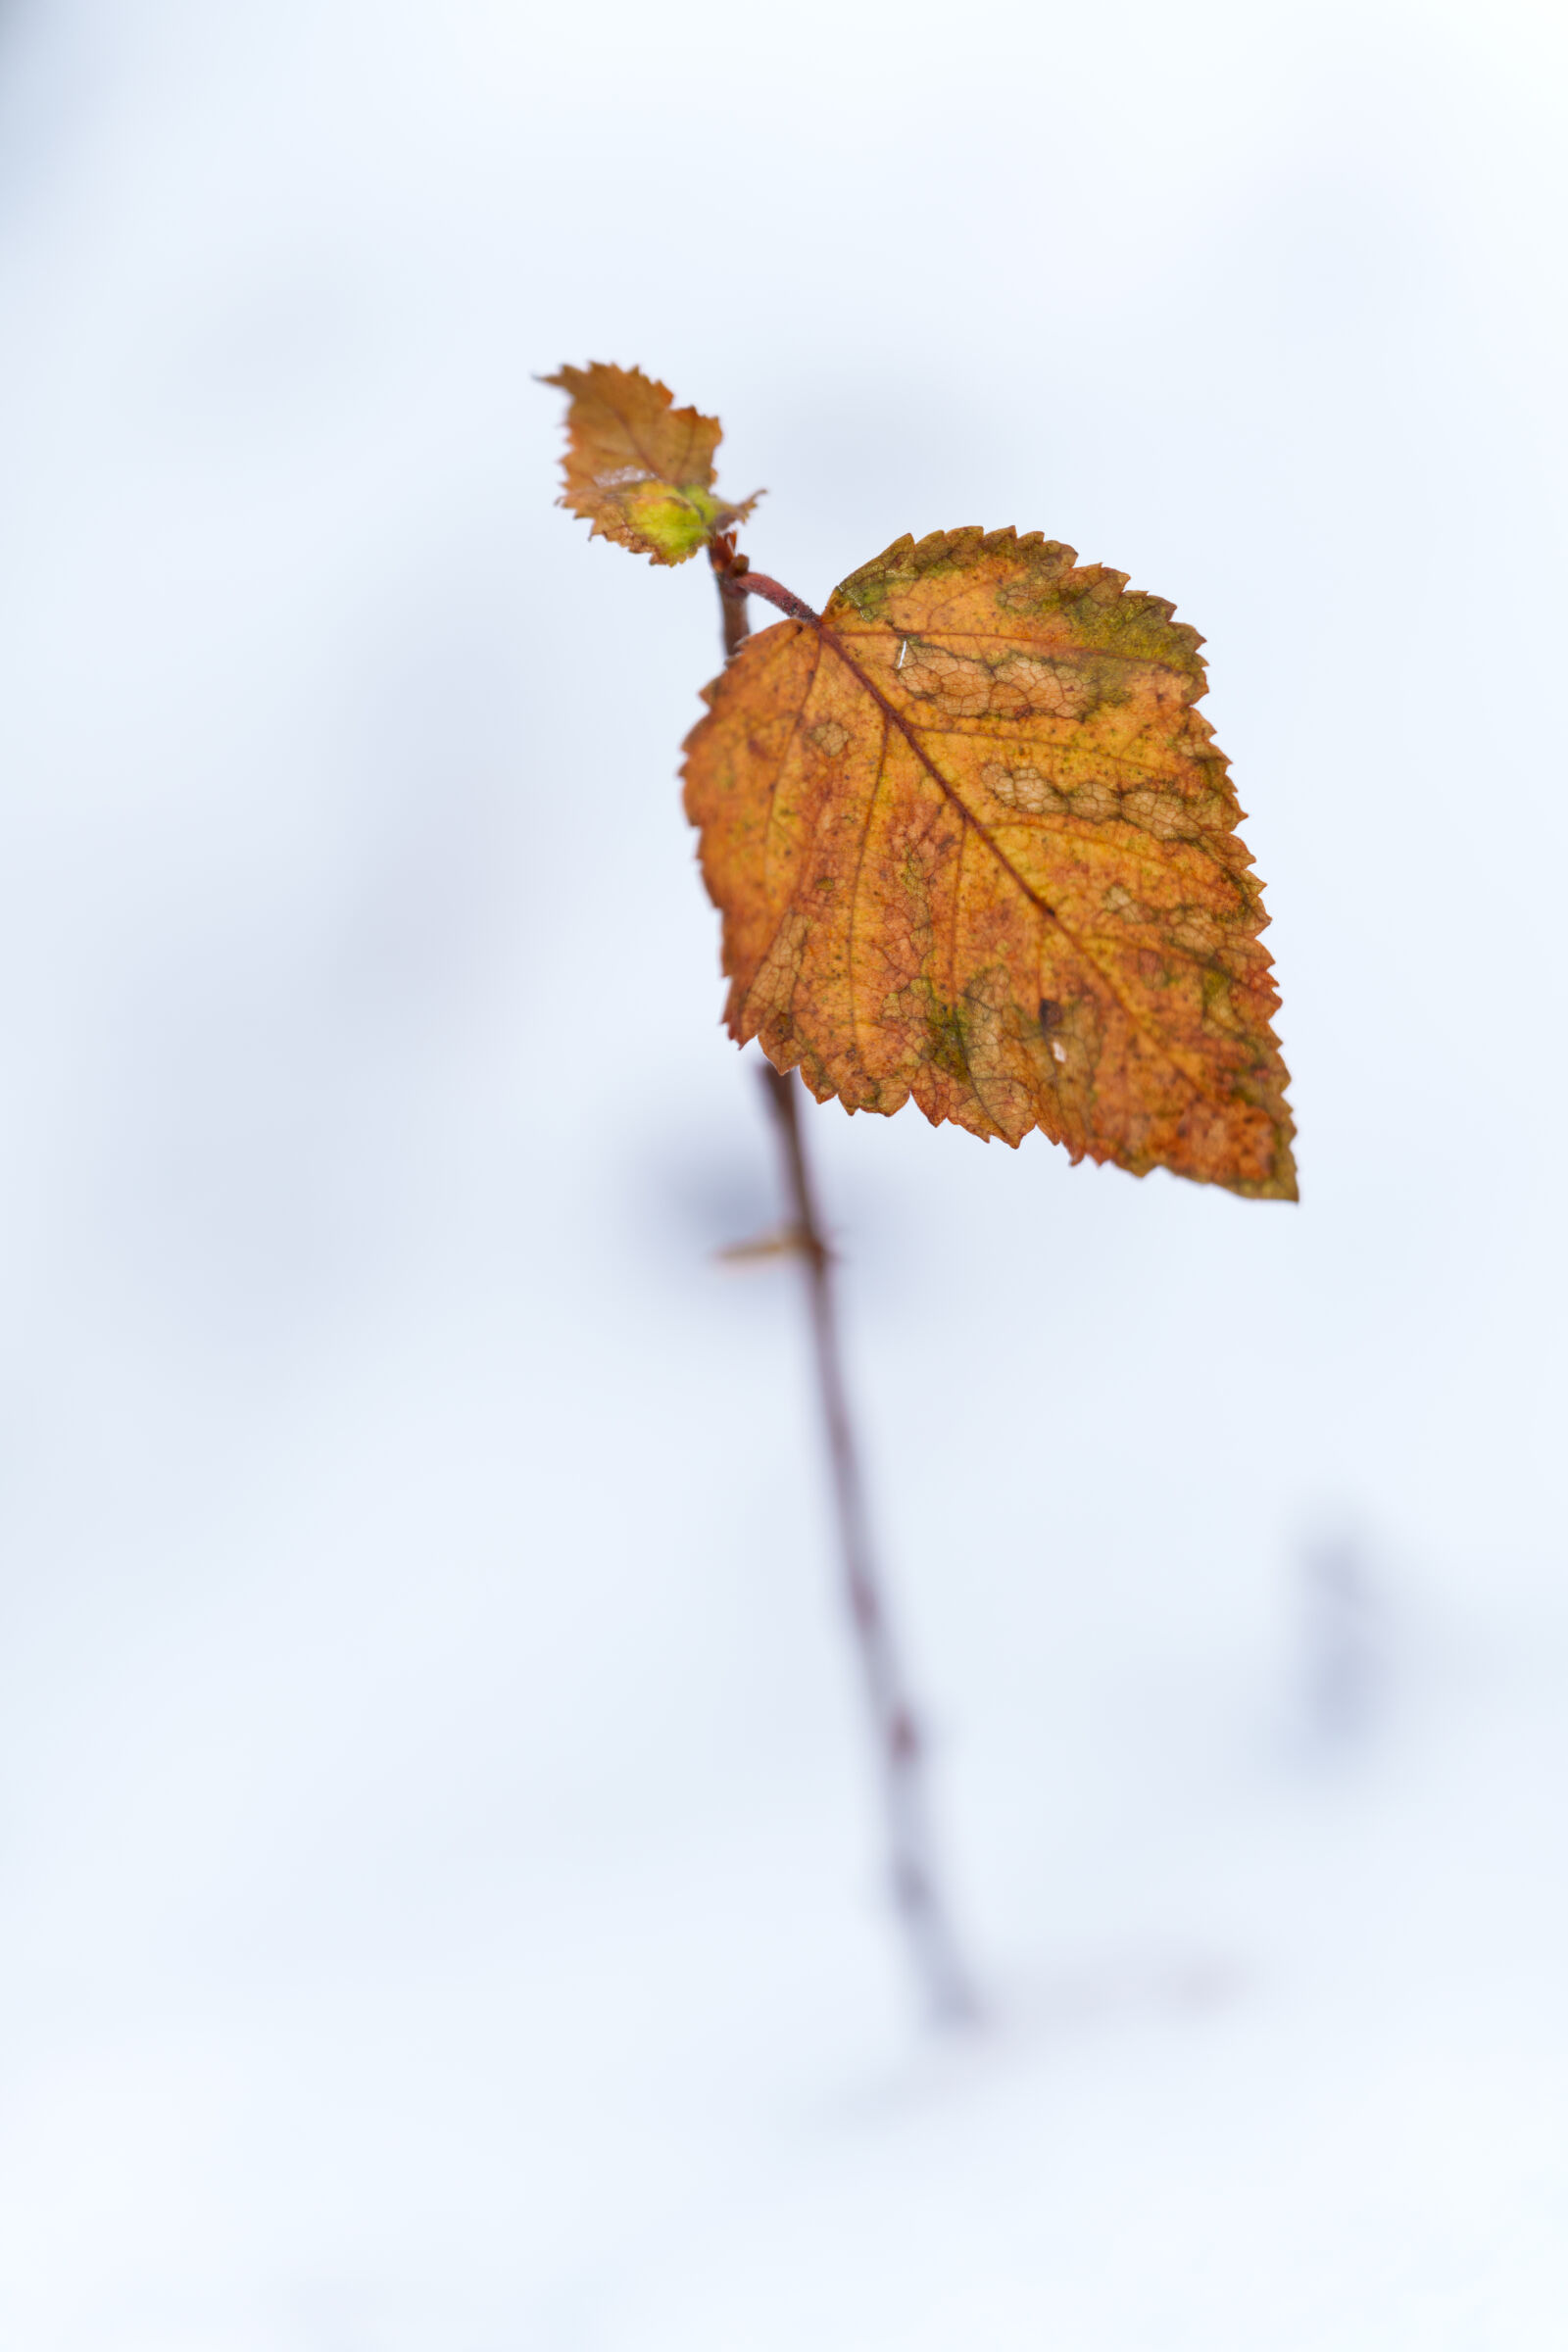 Sigma 70-200mm F2.8 DG DN OS | Sports sample photo. Last leaves of the photography